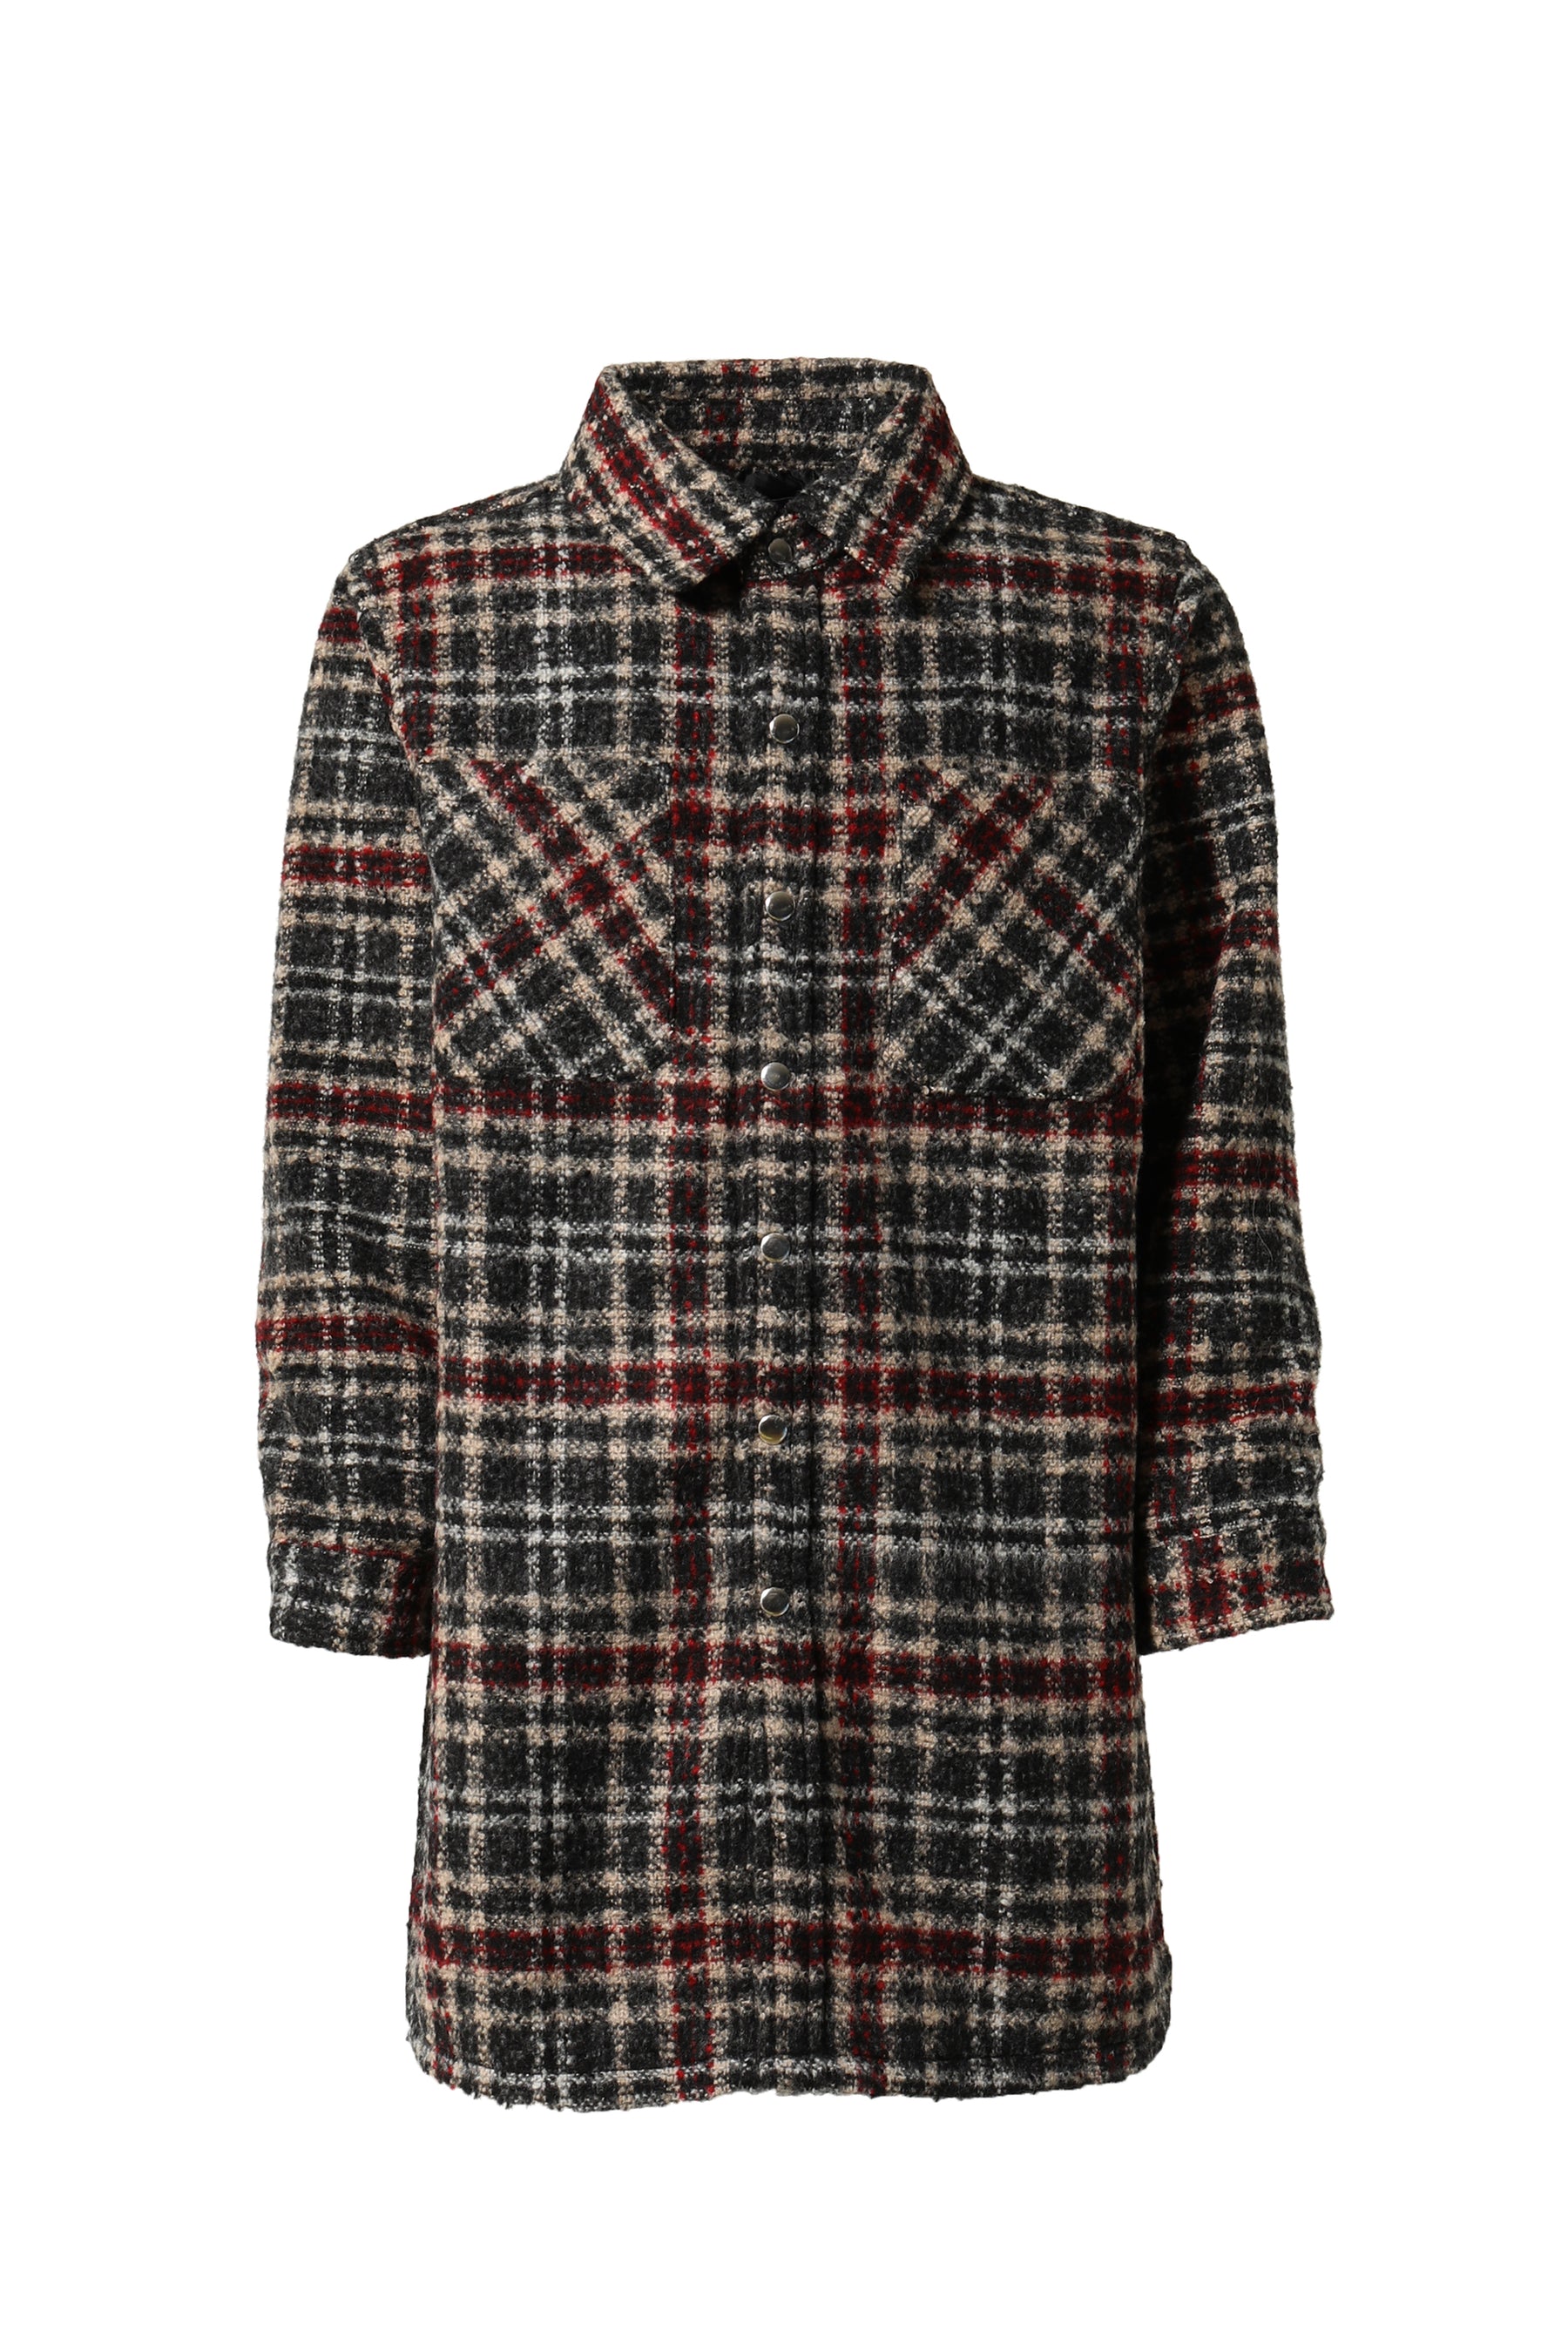 LAST NEST ラストネスト FW23 FLANNEL OVER LONG SHIRTS / BLK/RED -NUBIAN